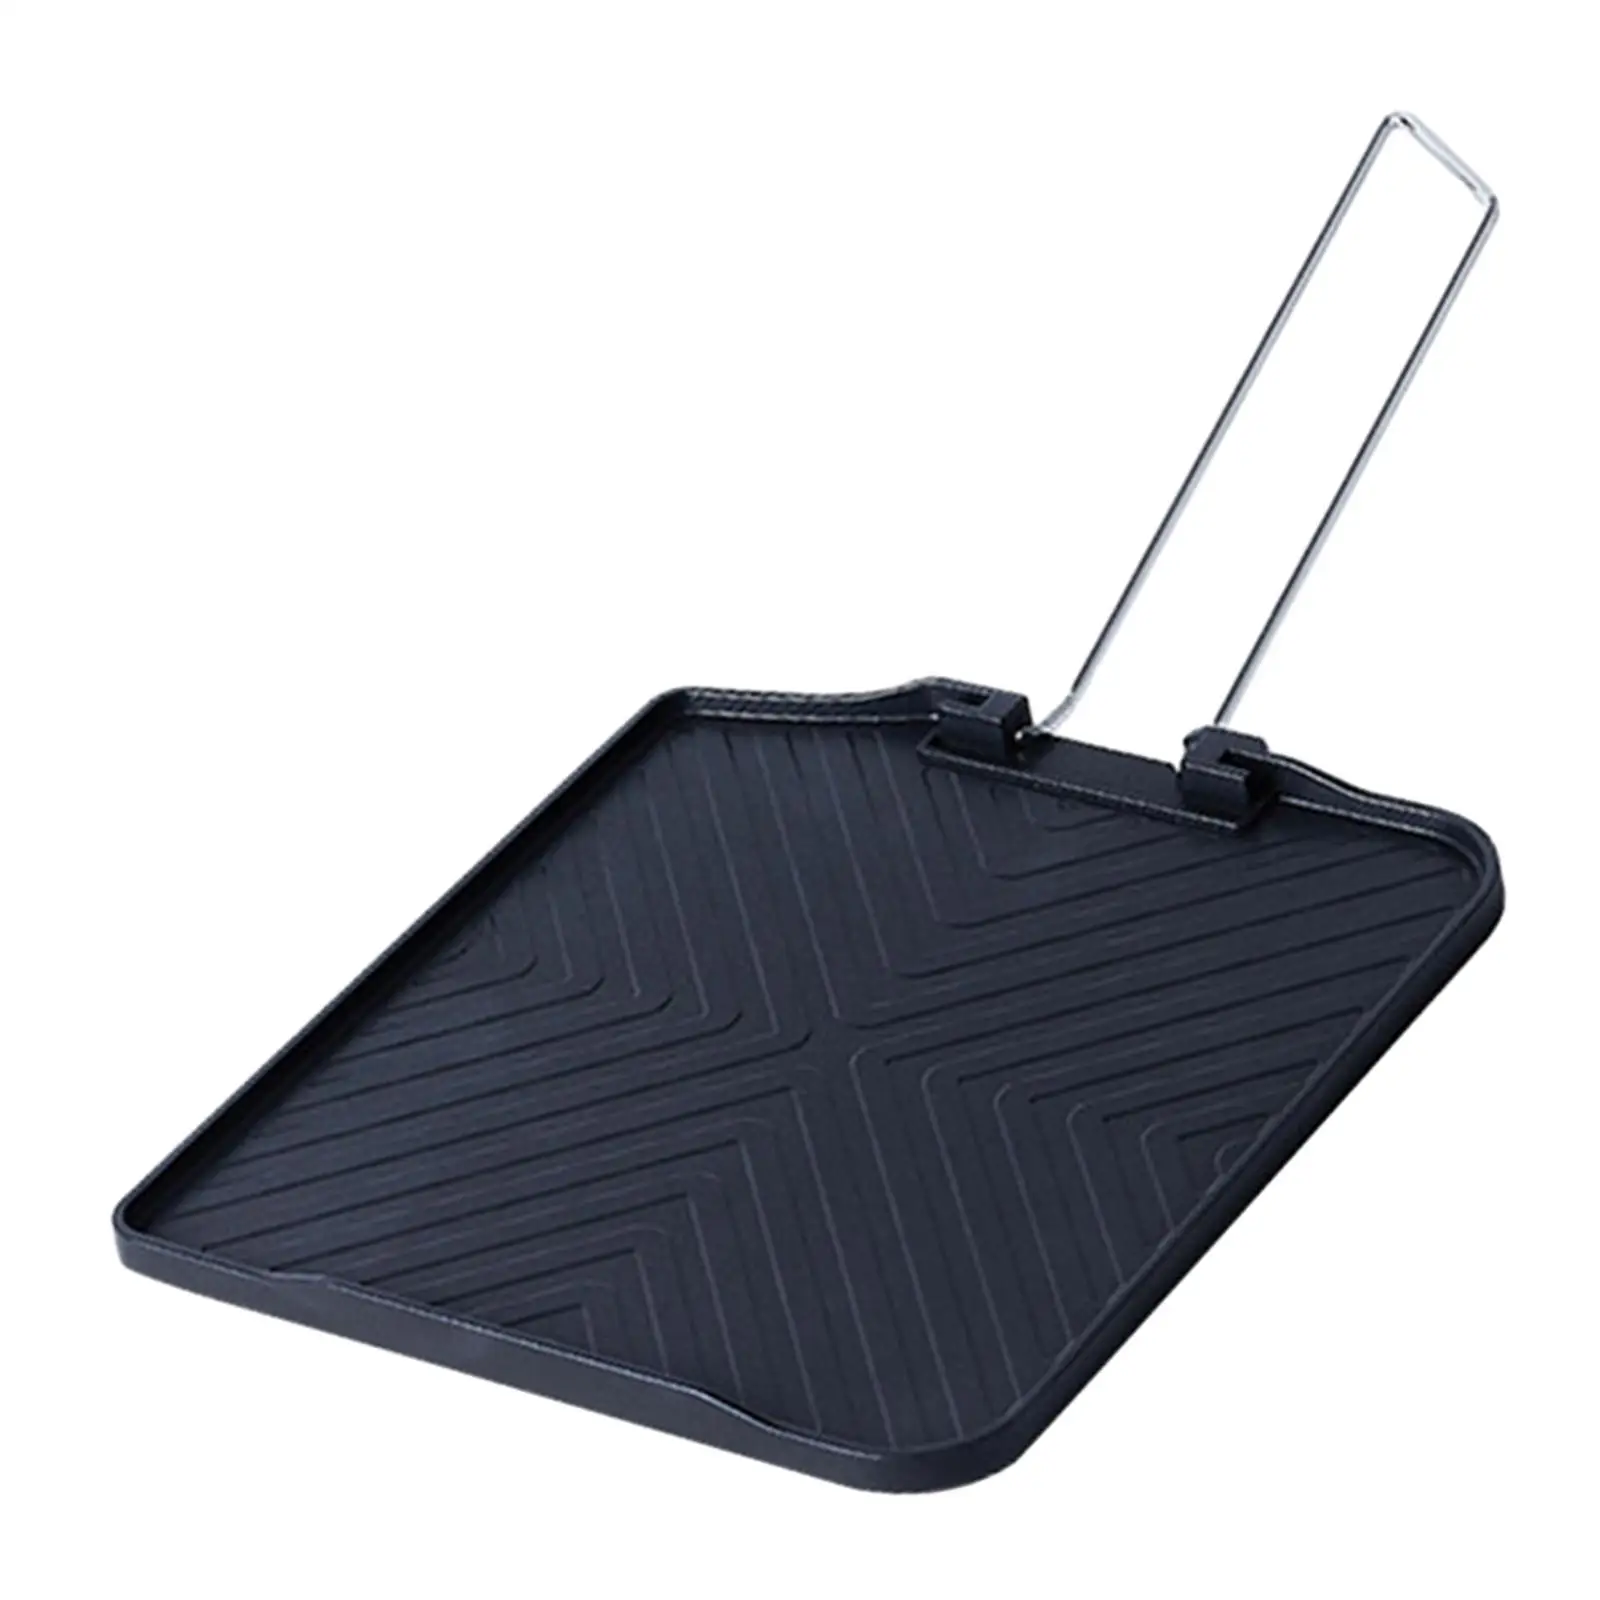 Camping Stove Grill Pans Square with Handle Nonstick Barbecue Plate Frying Pans BBQ Griddle Pans for Picnics Outdoor Barbecue